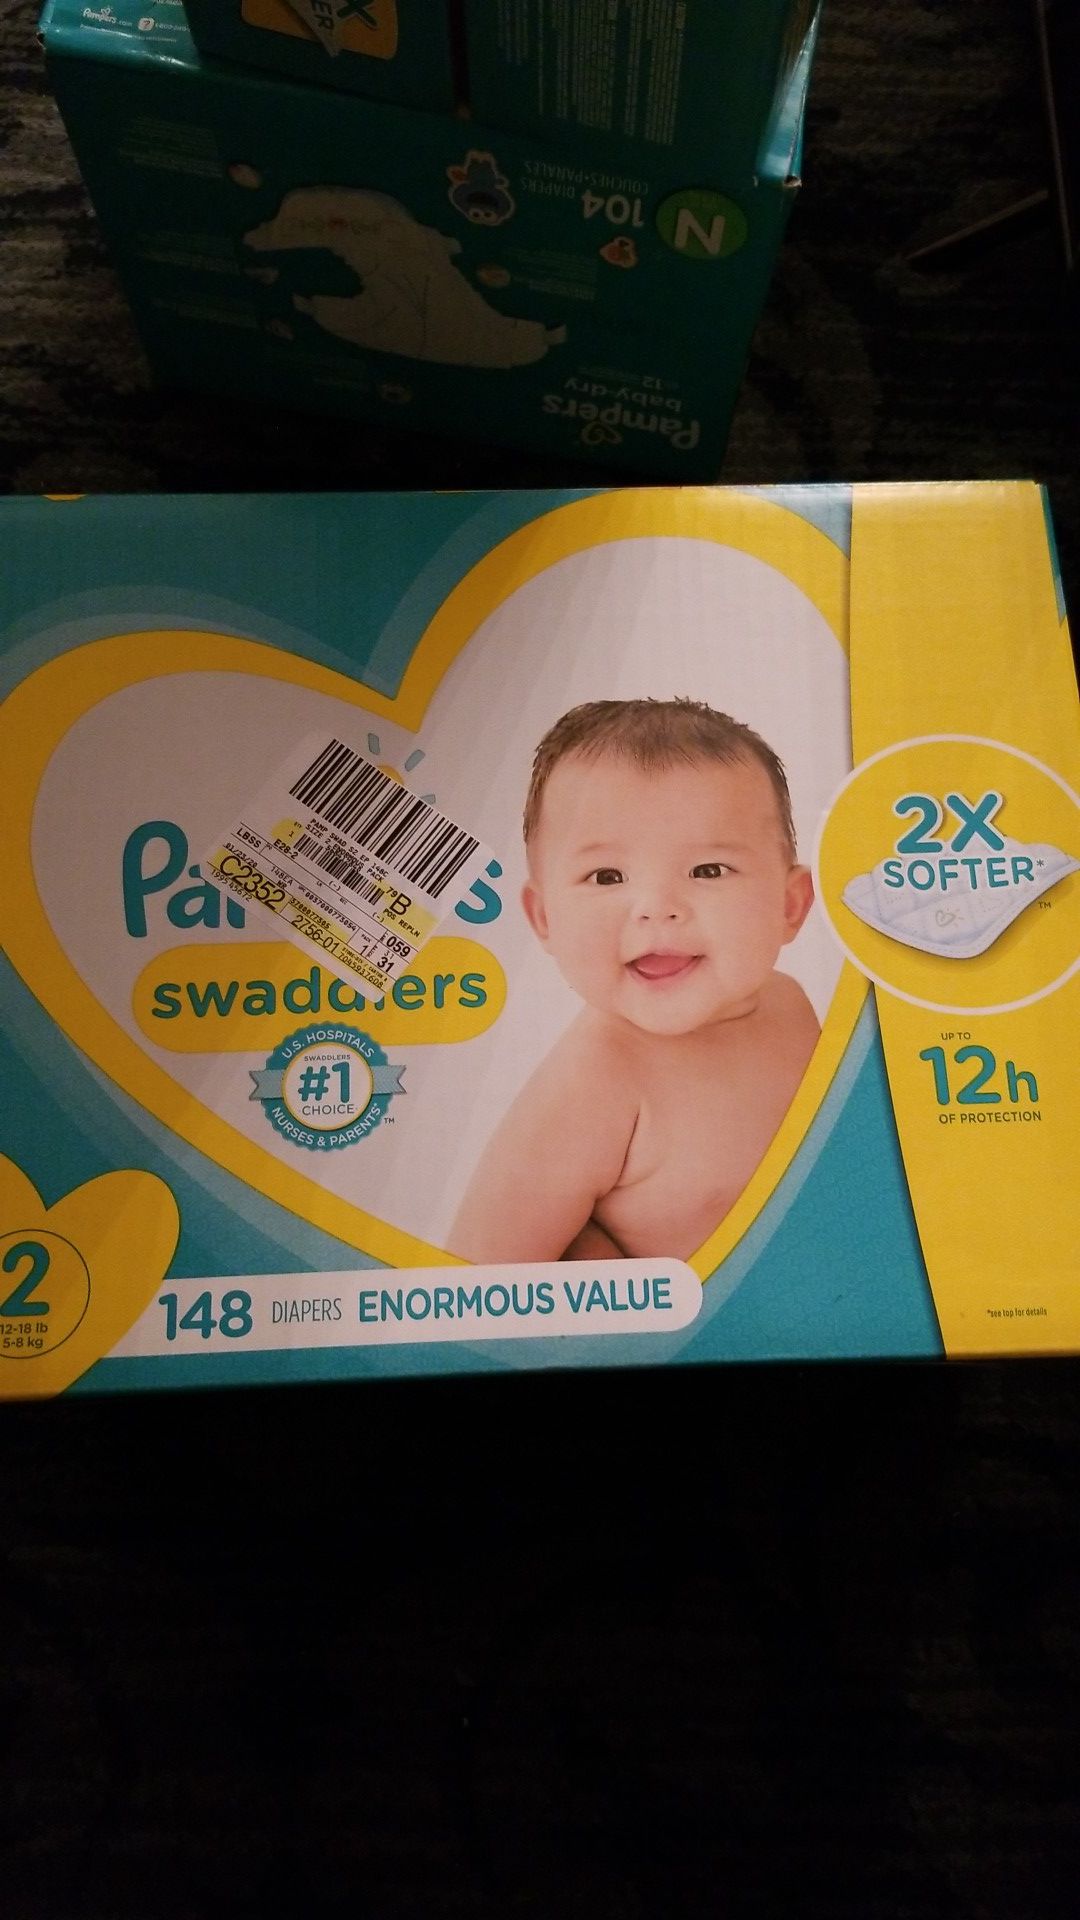 Pampers swaddlers size 2 diapers 148 count